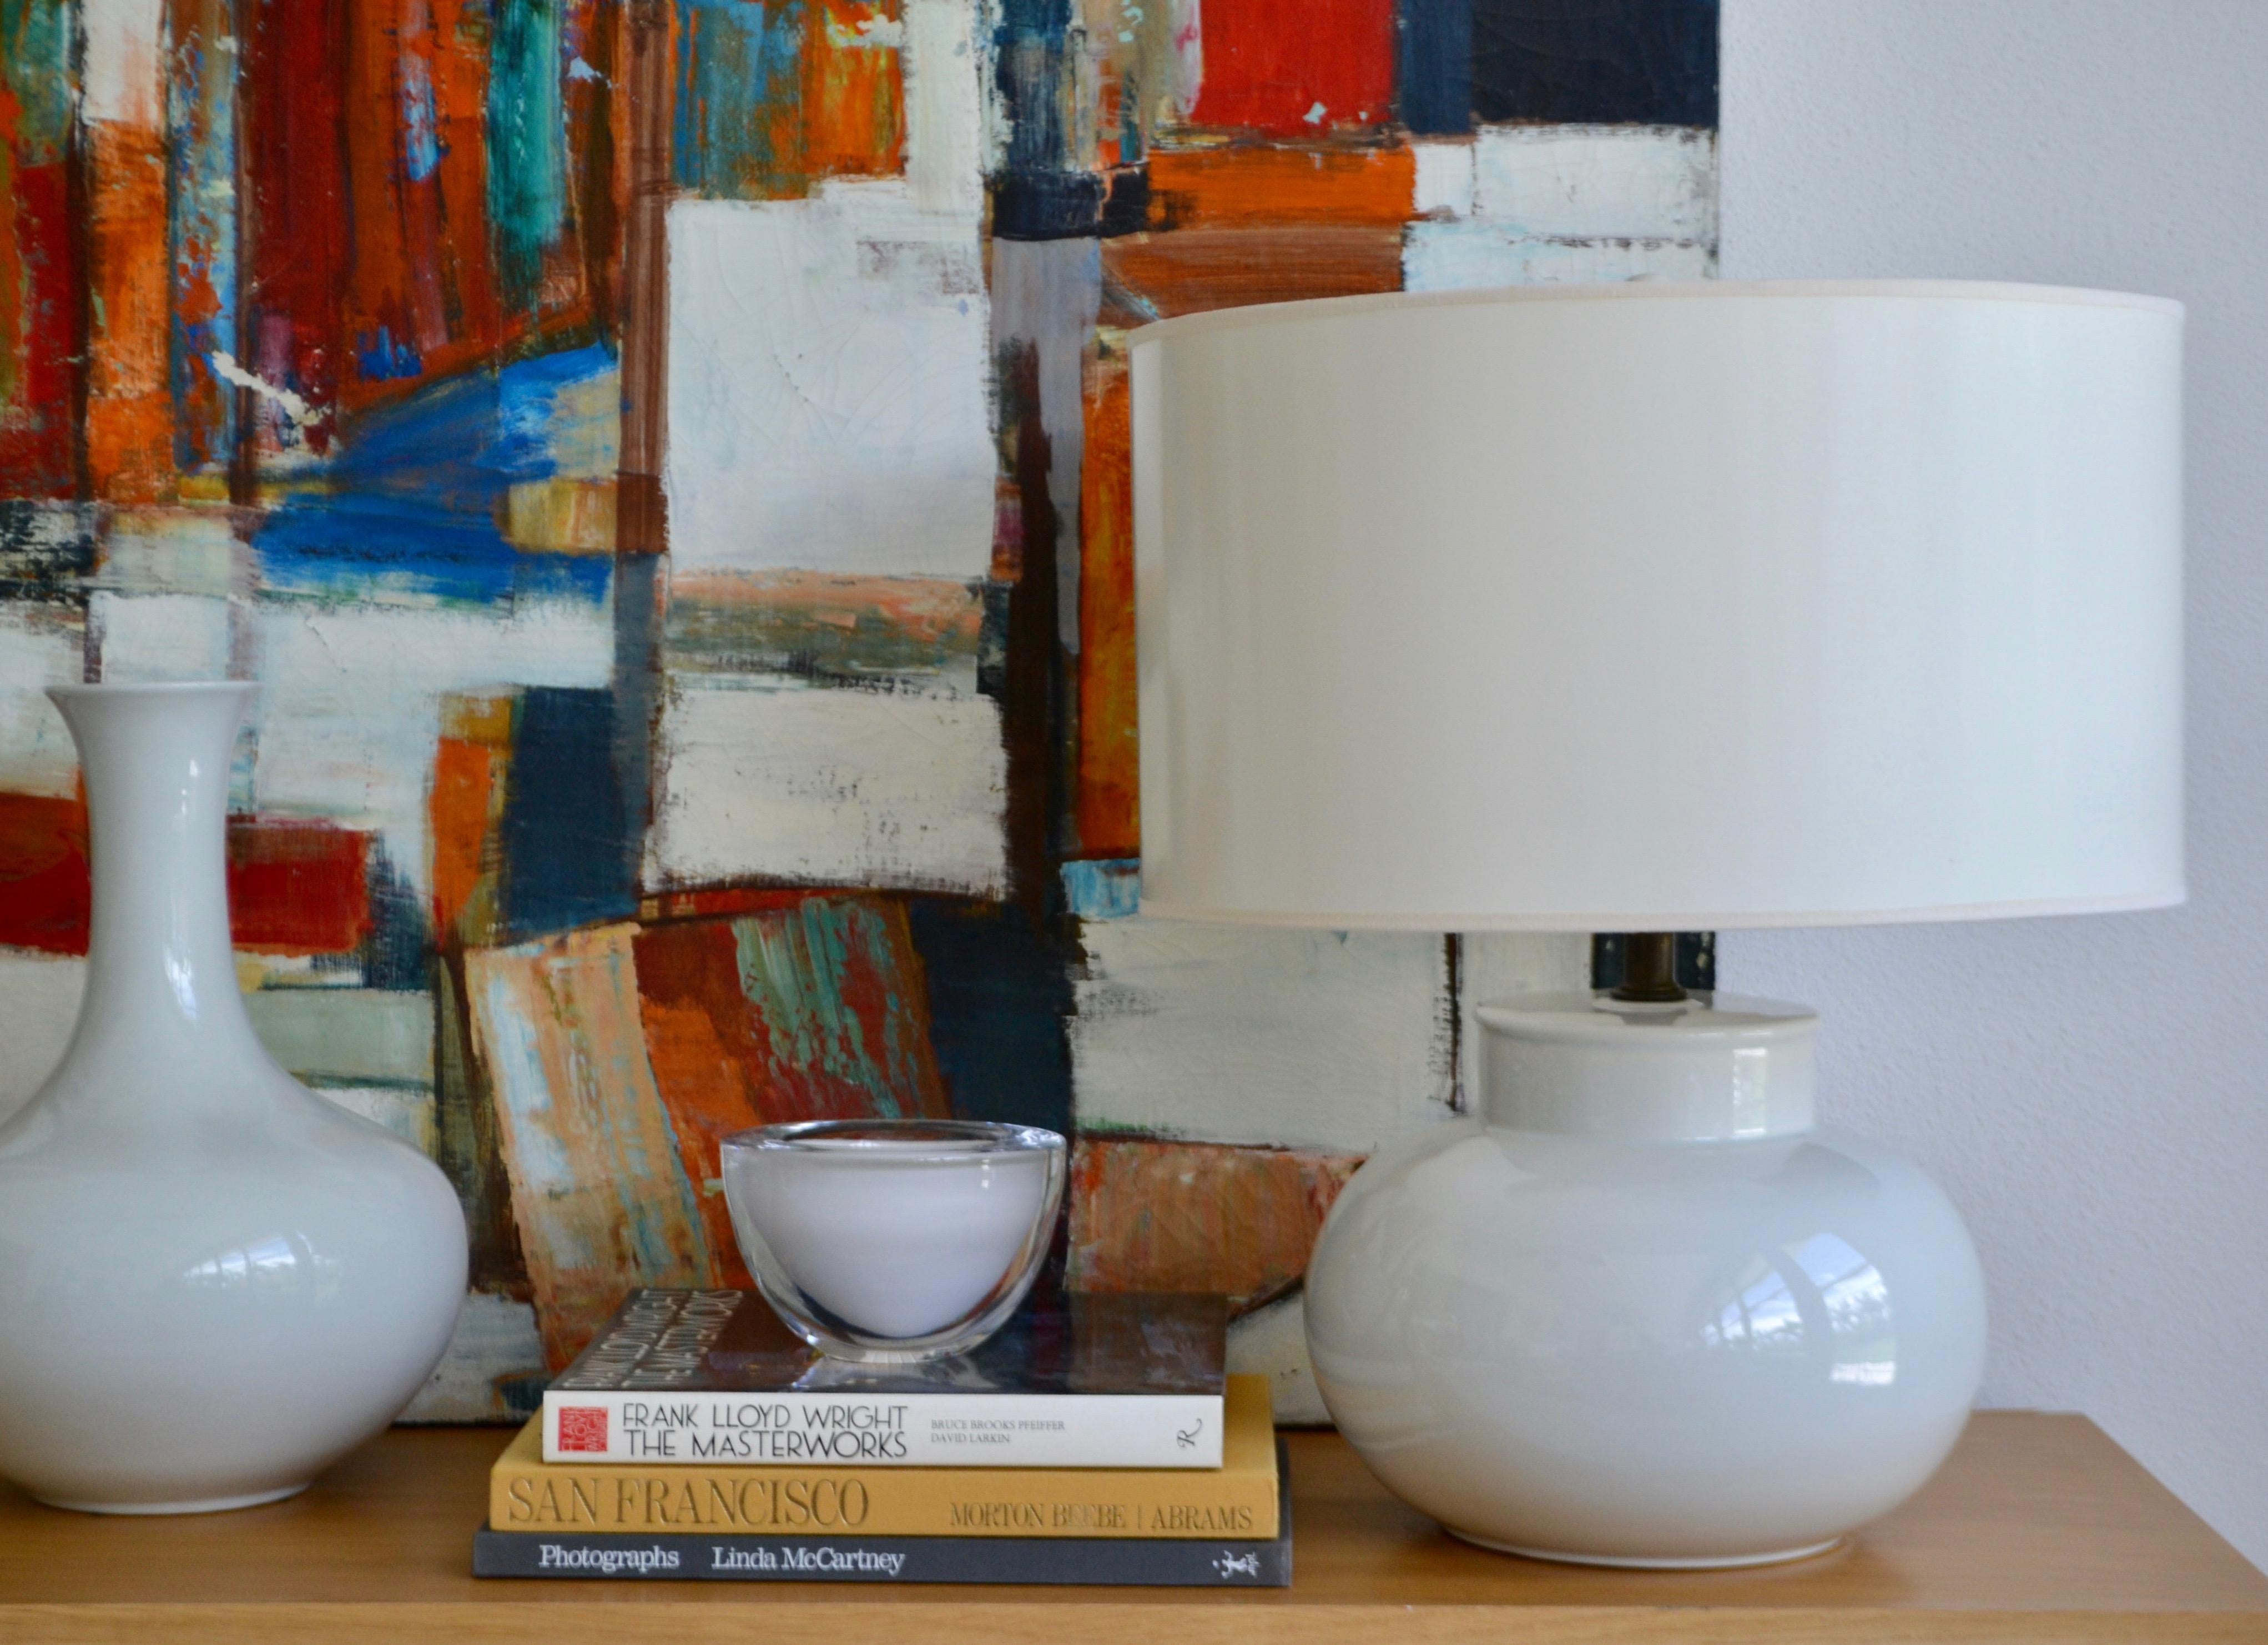 Striking Mid-Century Blanc de Chine ceramic gourd form table lamp, circa 1960s. This sleek hand thrown white glazed lamp is designed in the Minimalist fashion and wired with brass fittings.
Shade not included.
Measurements:
Overall: 22